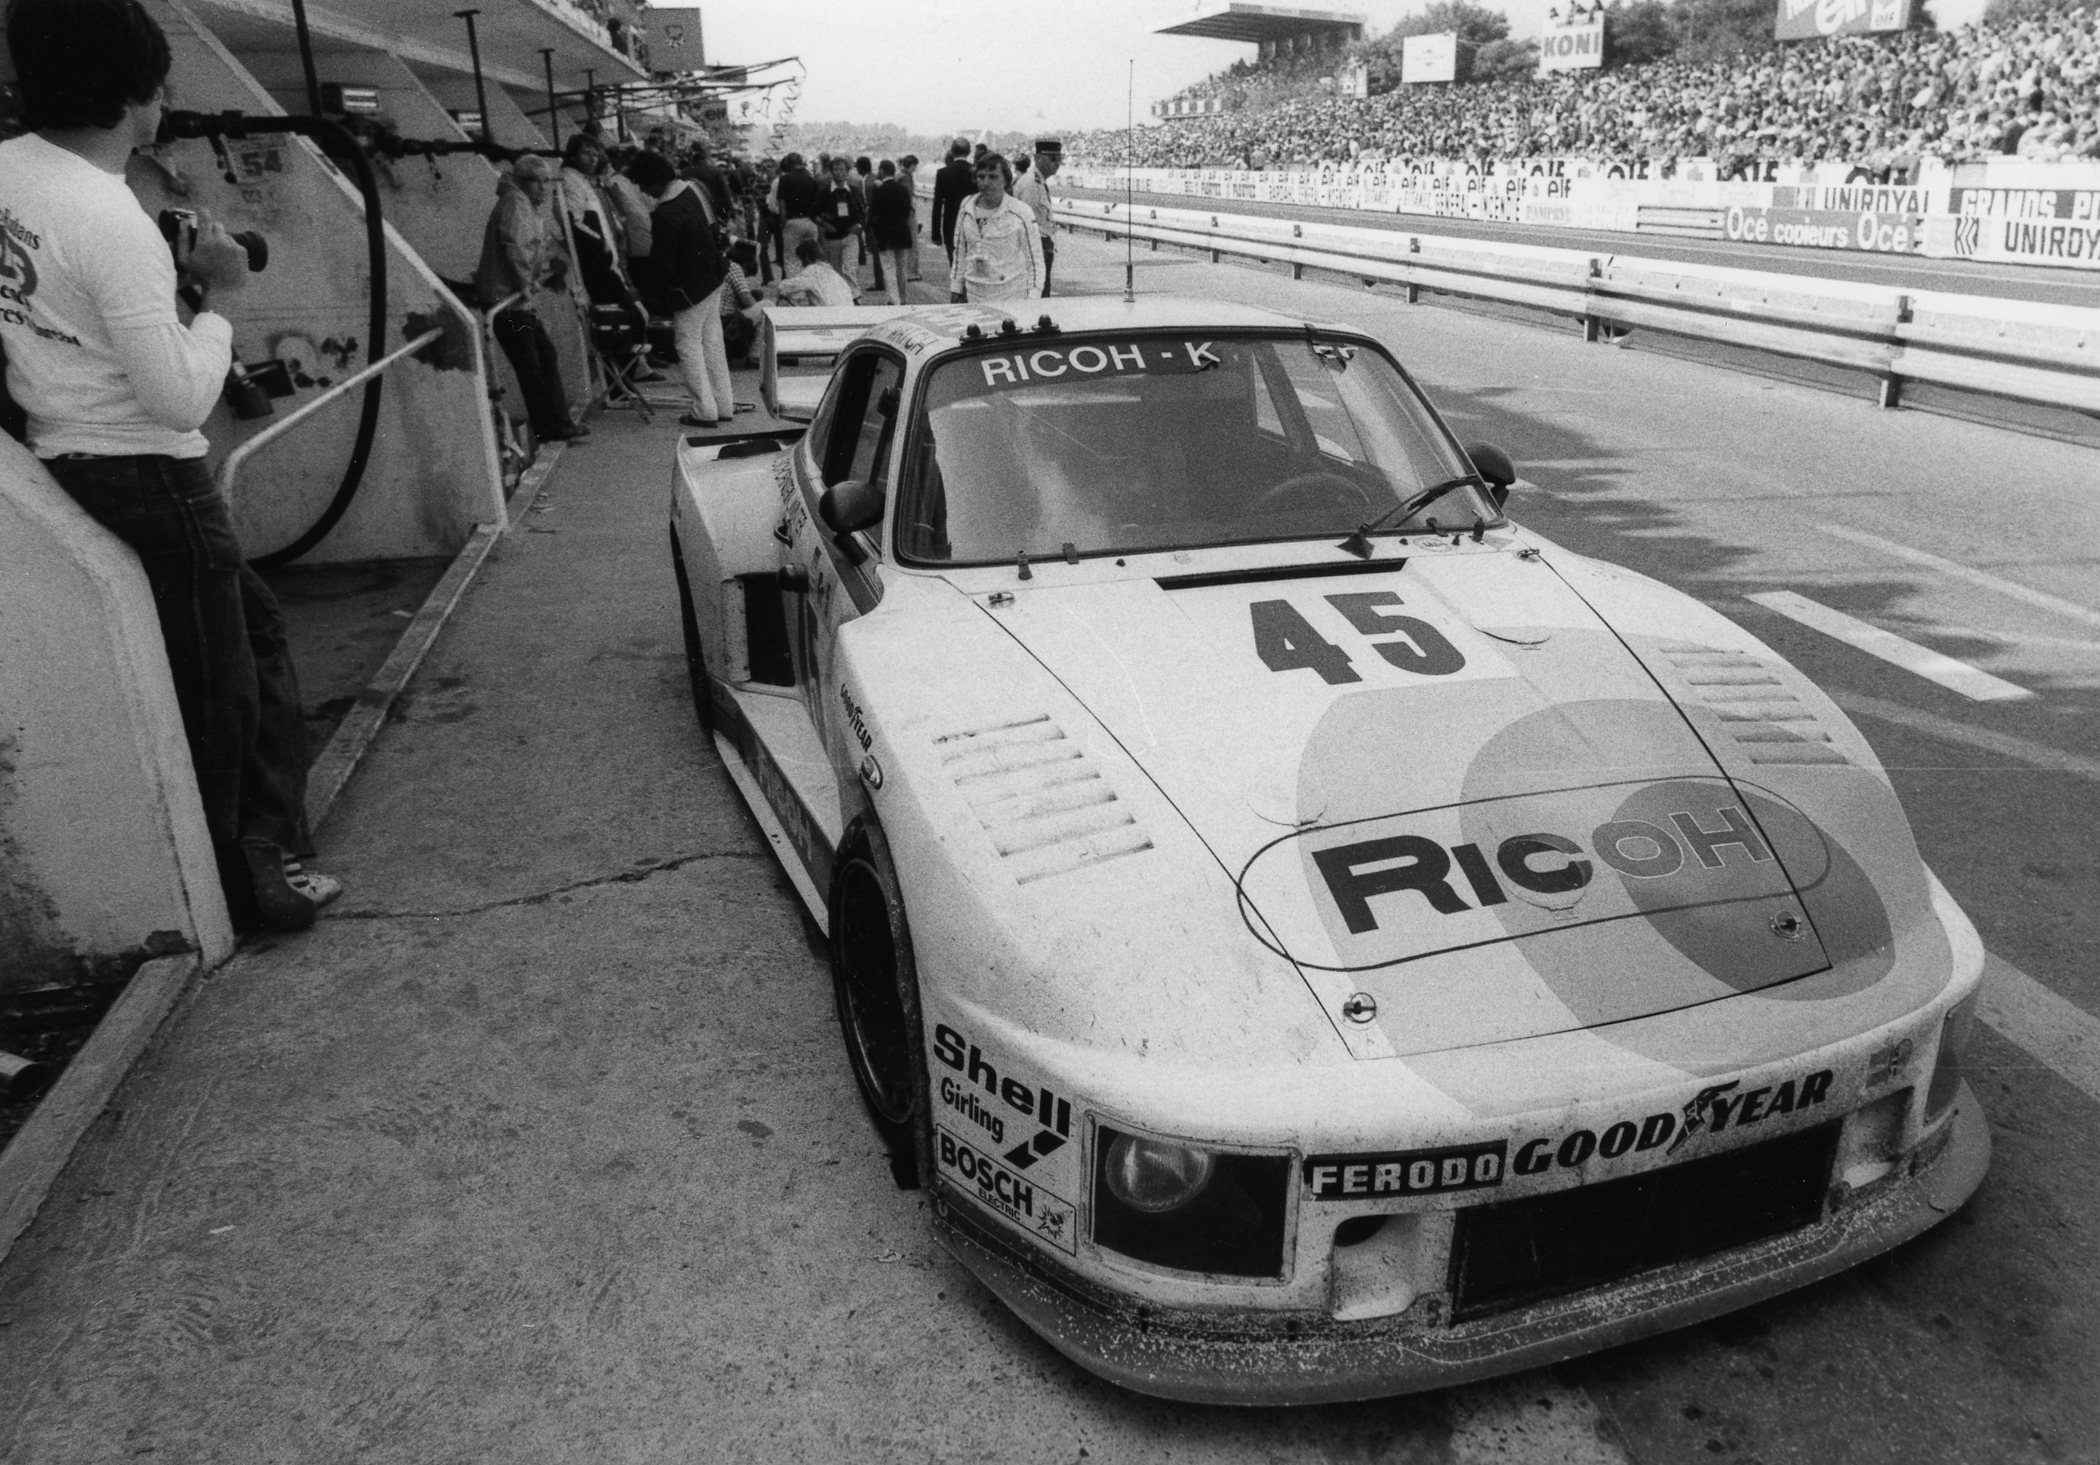 Krages shared the magnificent 935 with none other than Philippe Gurdjian, gentleman driver, future Grand Prix organiser and one of the most famous behind the scenes players in Formula 1 between 1980 and 2000.